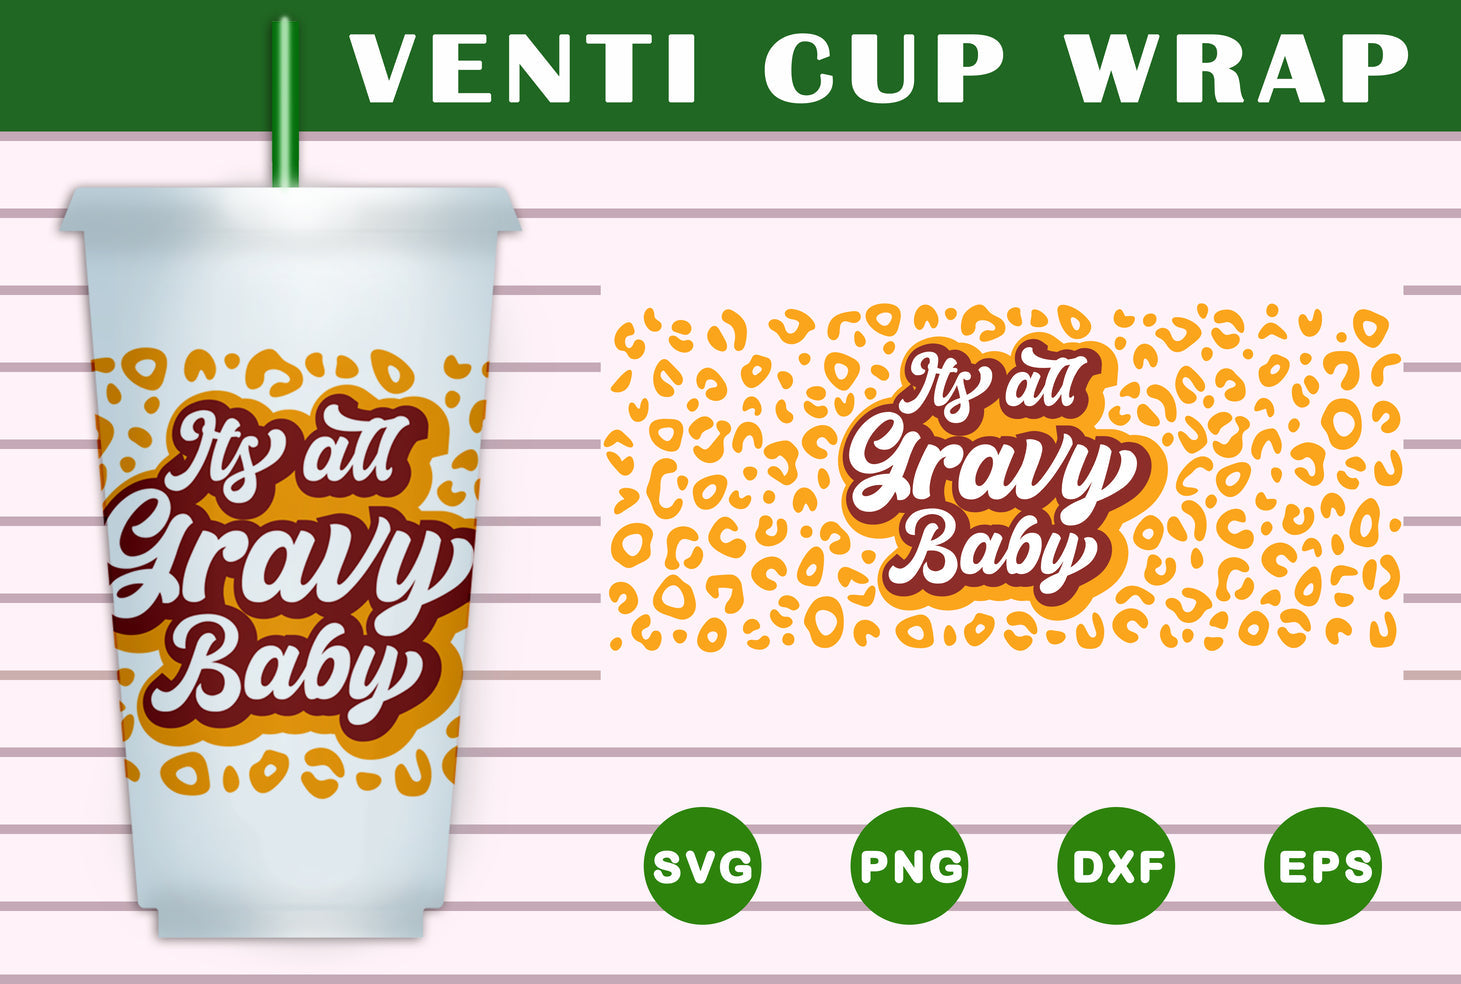 It's All Gravy Baby Libbey Cup SVG Free And Png Download- 8SVG